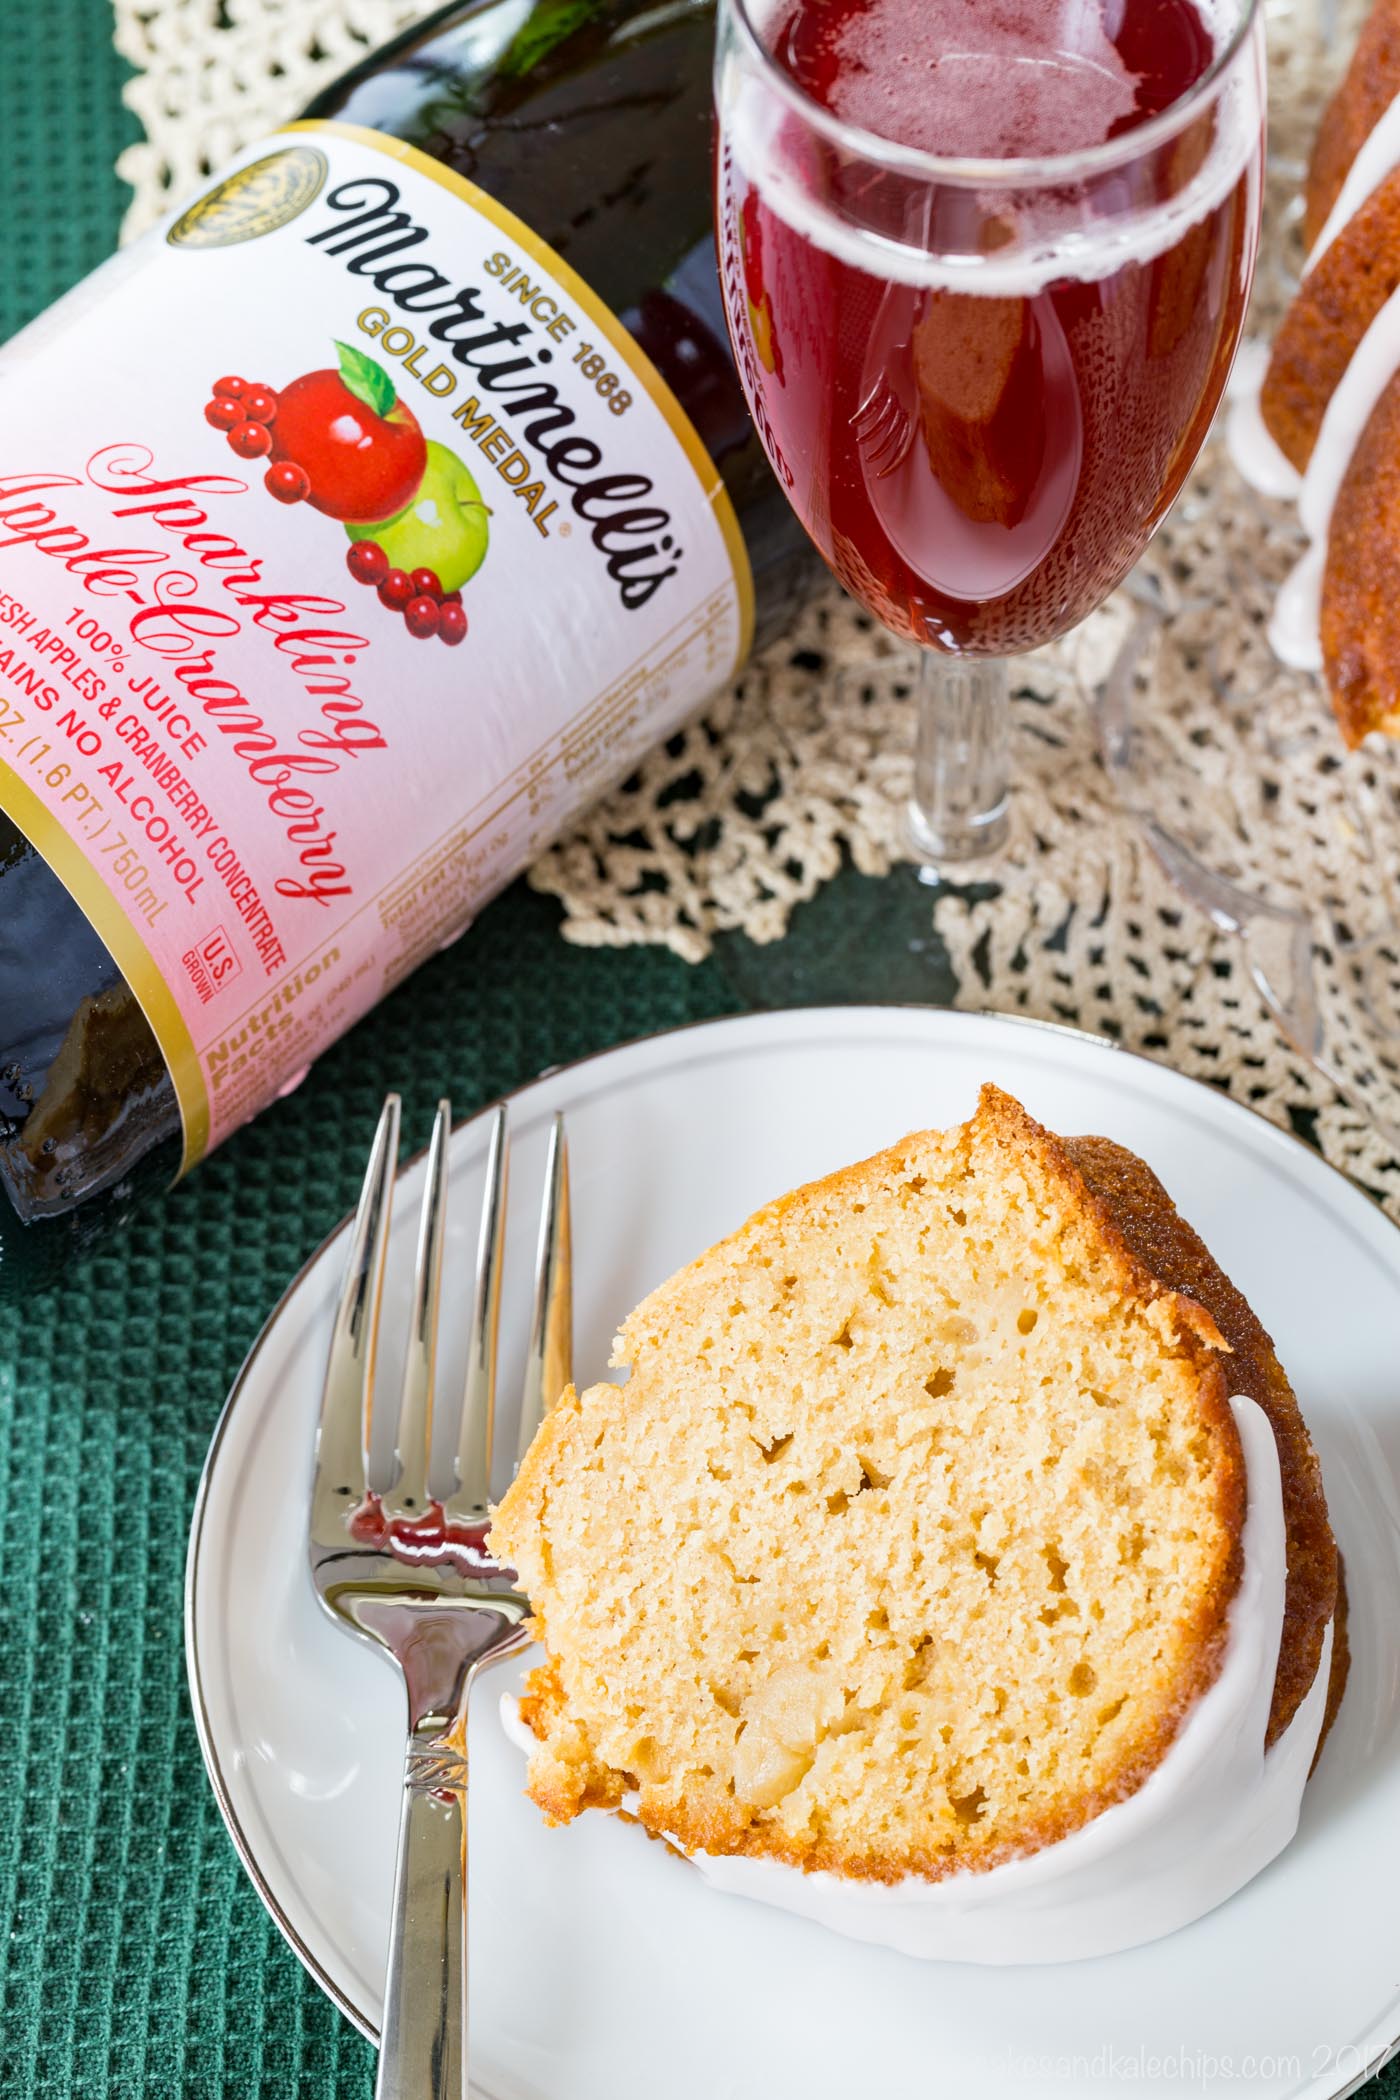 A slice of gluten-free apple cranberry donut cake on a plate next to a fork and a bottle of Martinelli's sparkling cider.